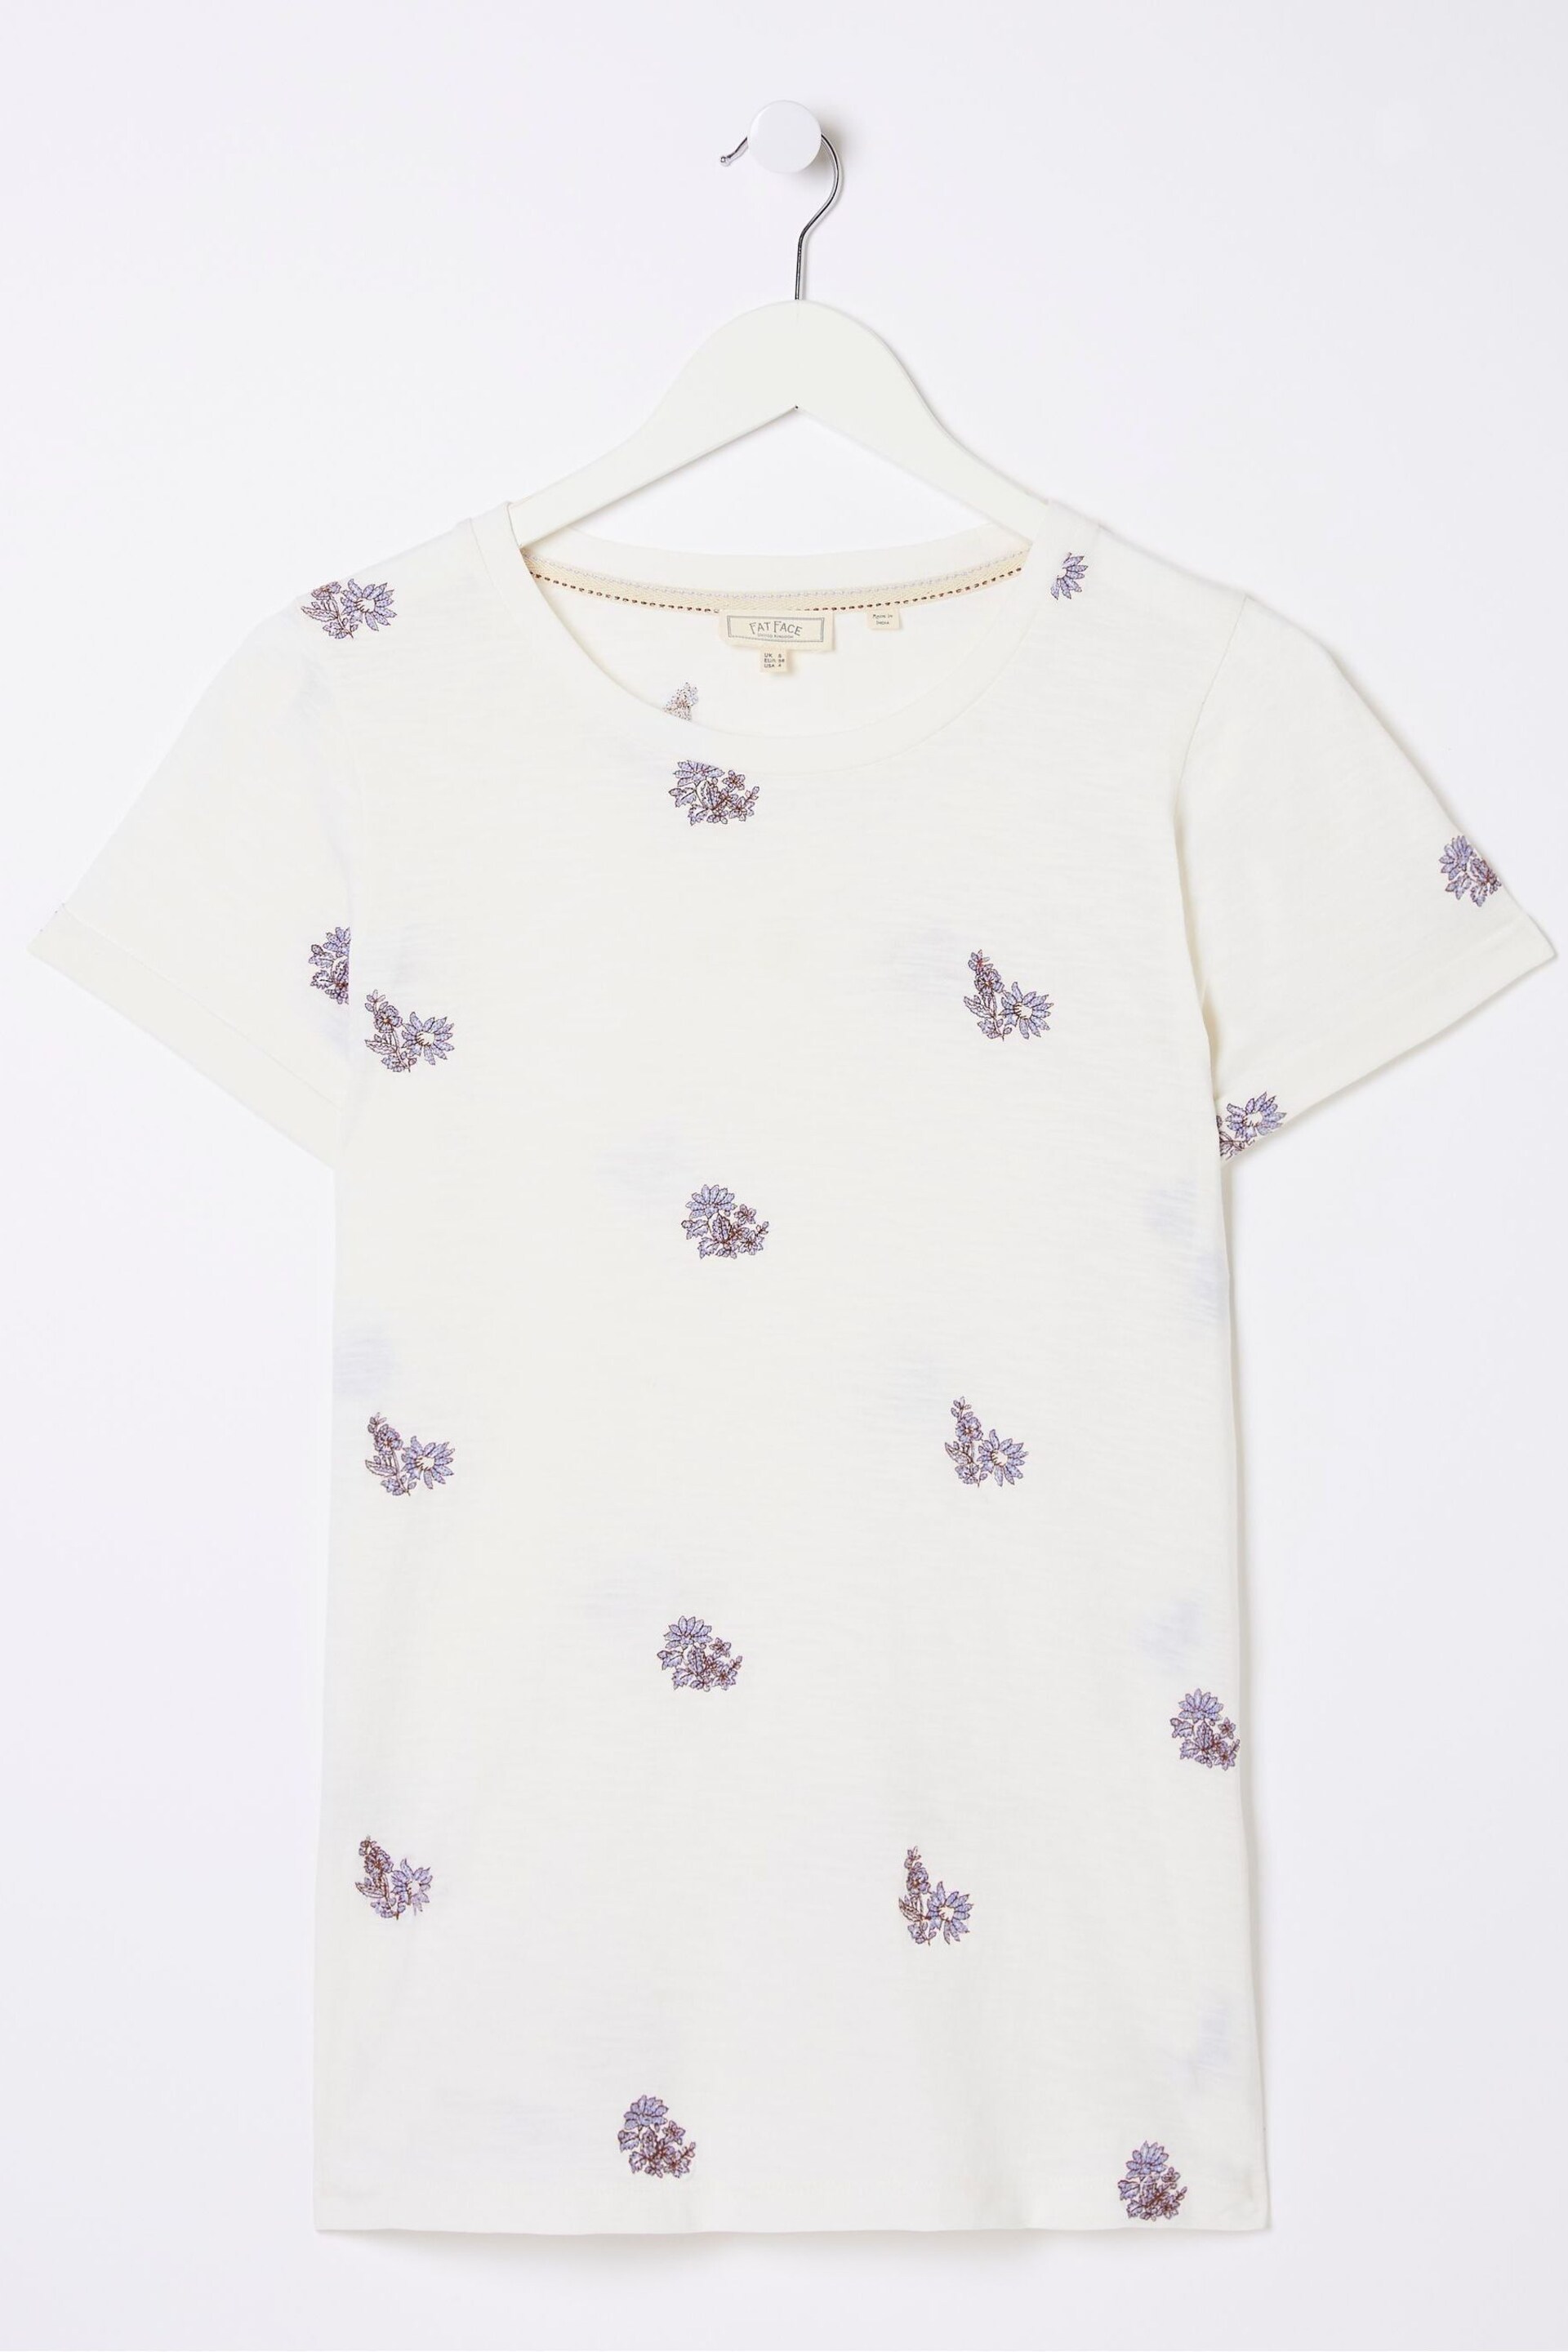 FatFace Natural Floral Embroidered T-Shirt - Image 4 of 4